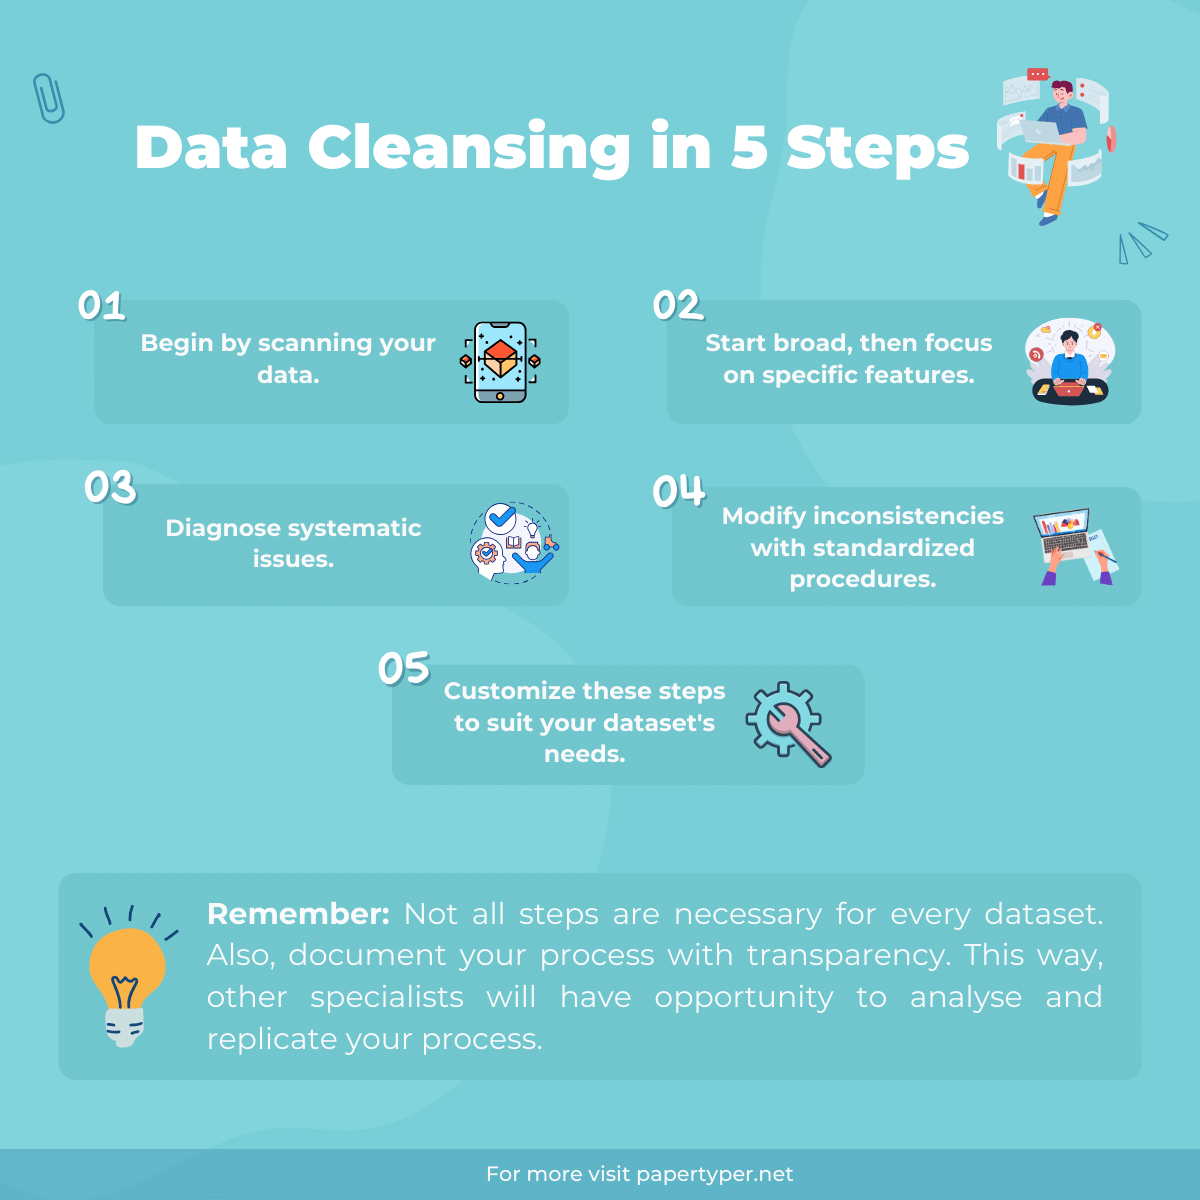 Process of Data Cleansing Step-by-Step